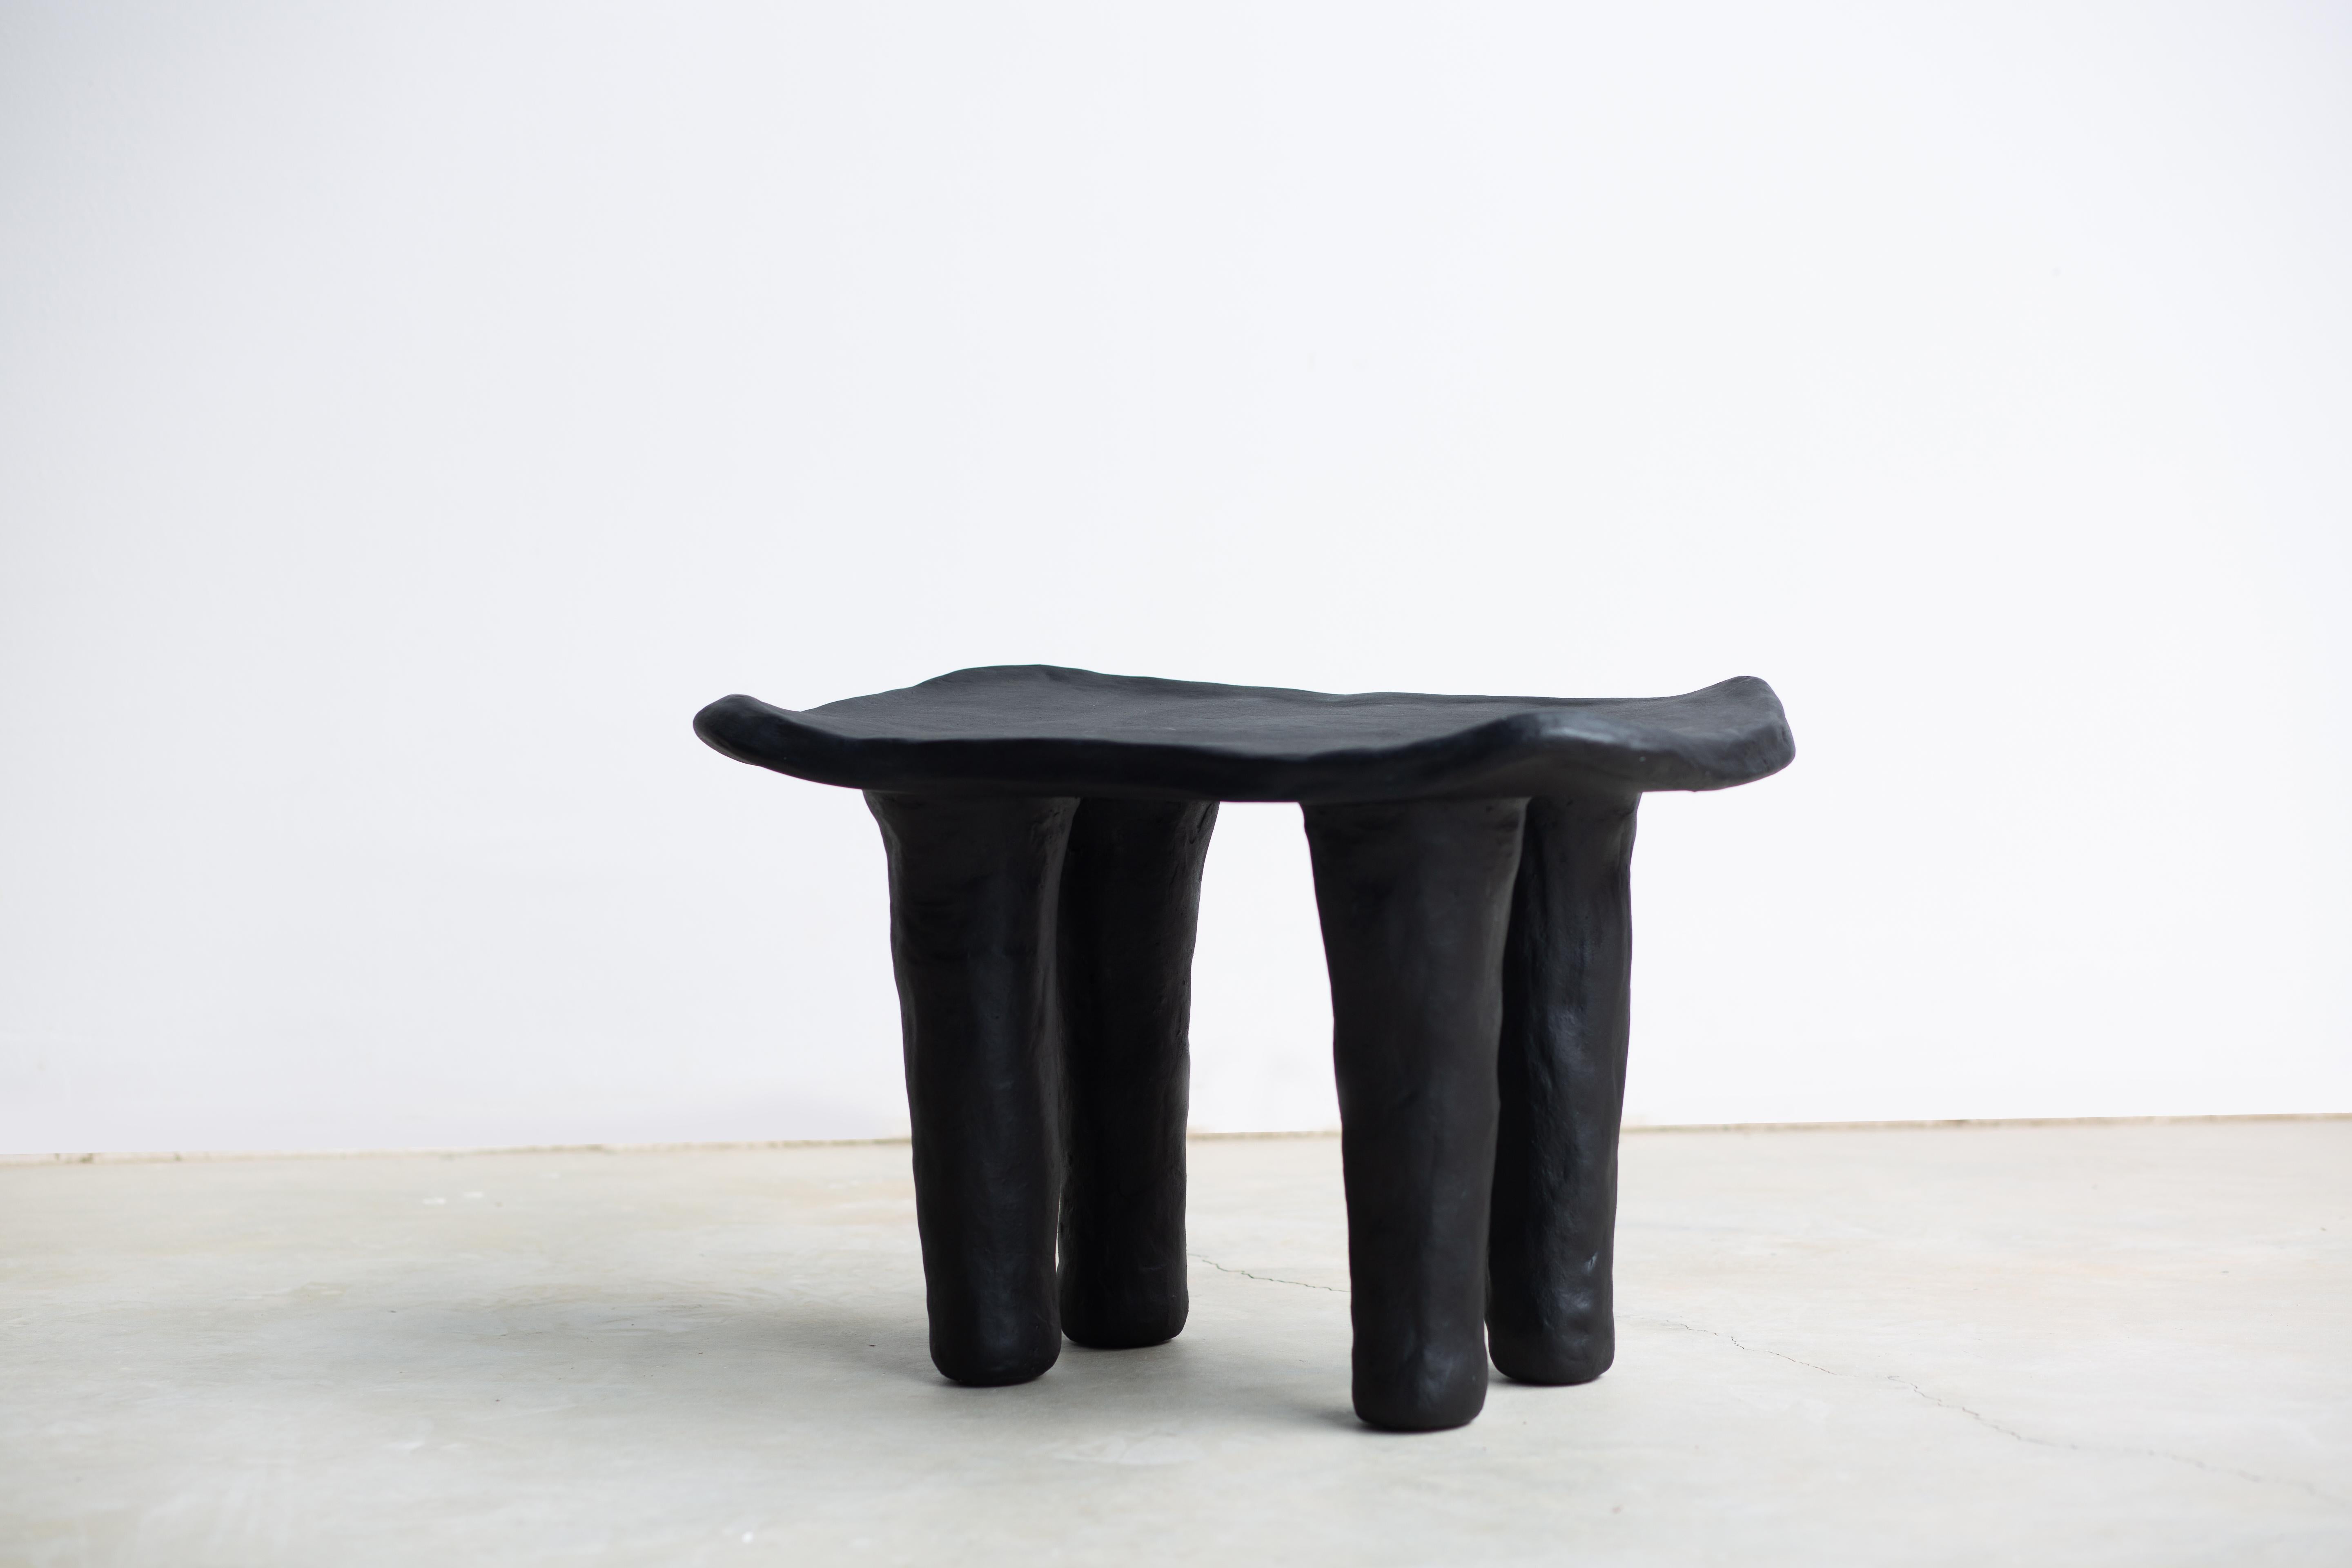 Quattuor Stool by Isin Sezgi Avci
Unique Piece.
Dimensions: D 54 x W 33 x H 38 cm.
Materials: Hand-built ceramic.

Quattuor is a piece of ceramic sculptural furniture. The form’s simplicity is created by hand and brush strokes that keep its heavy